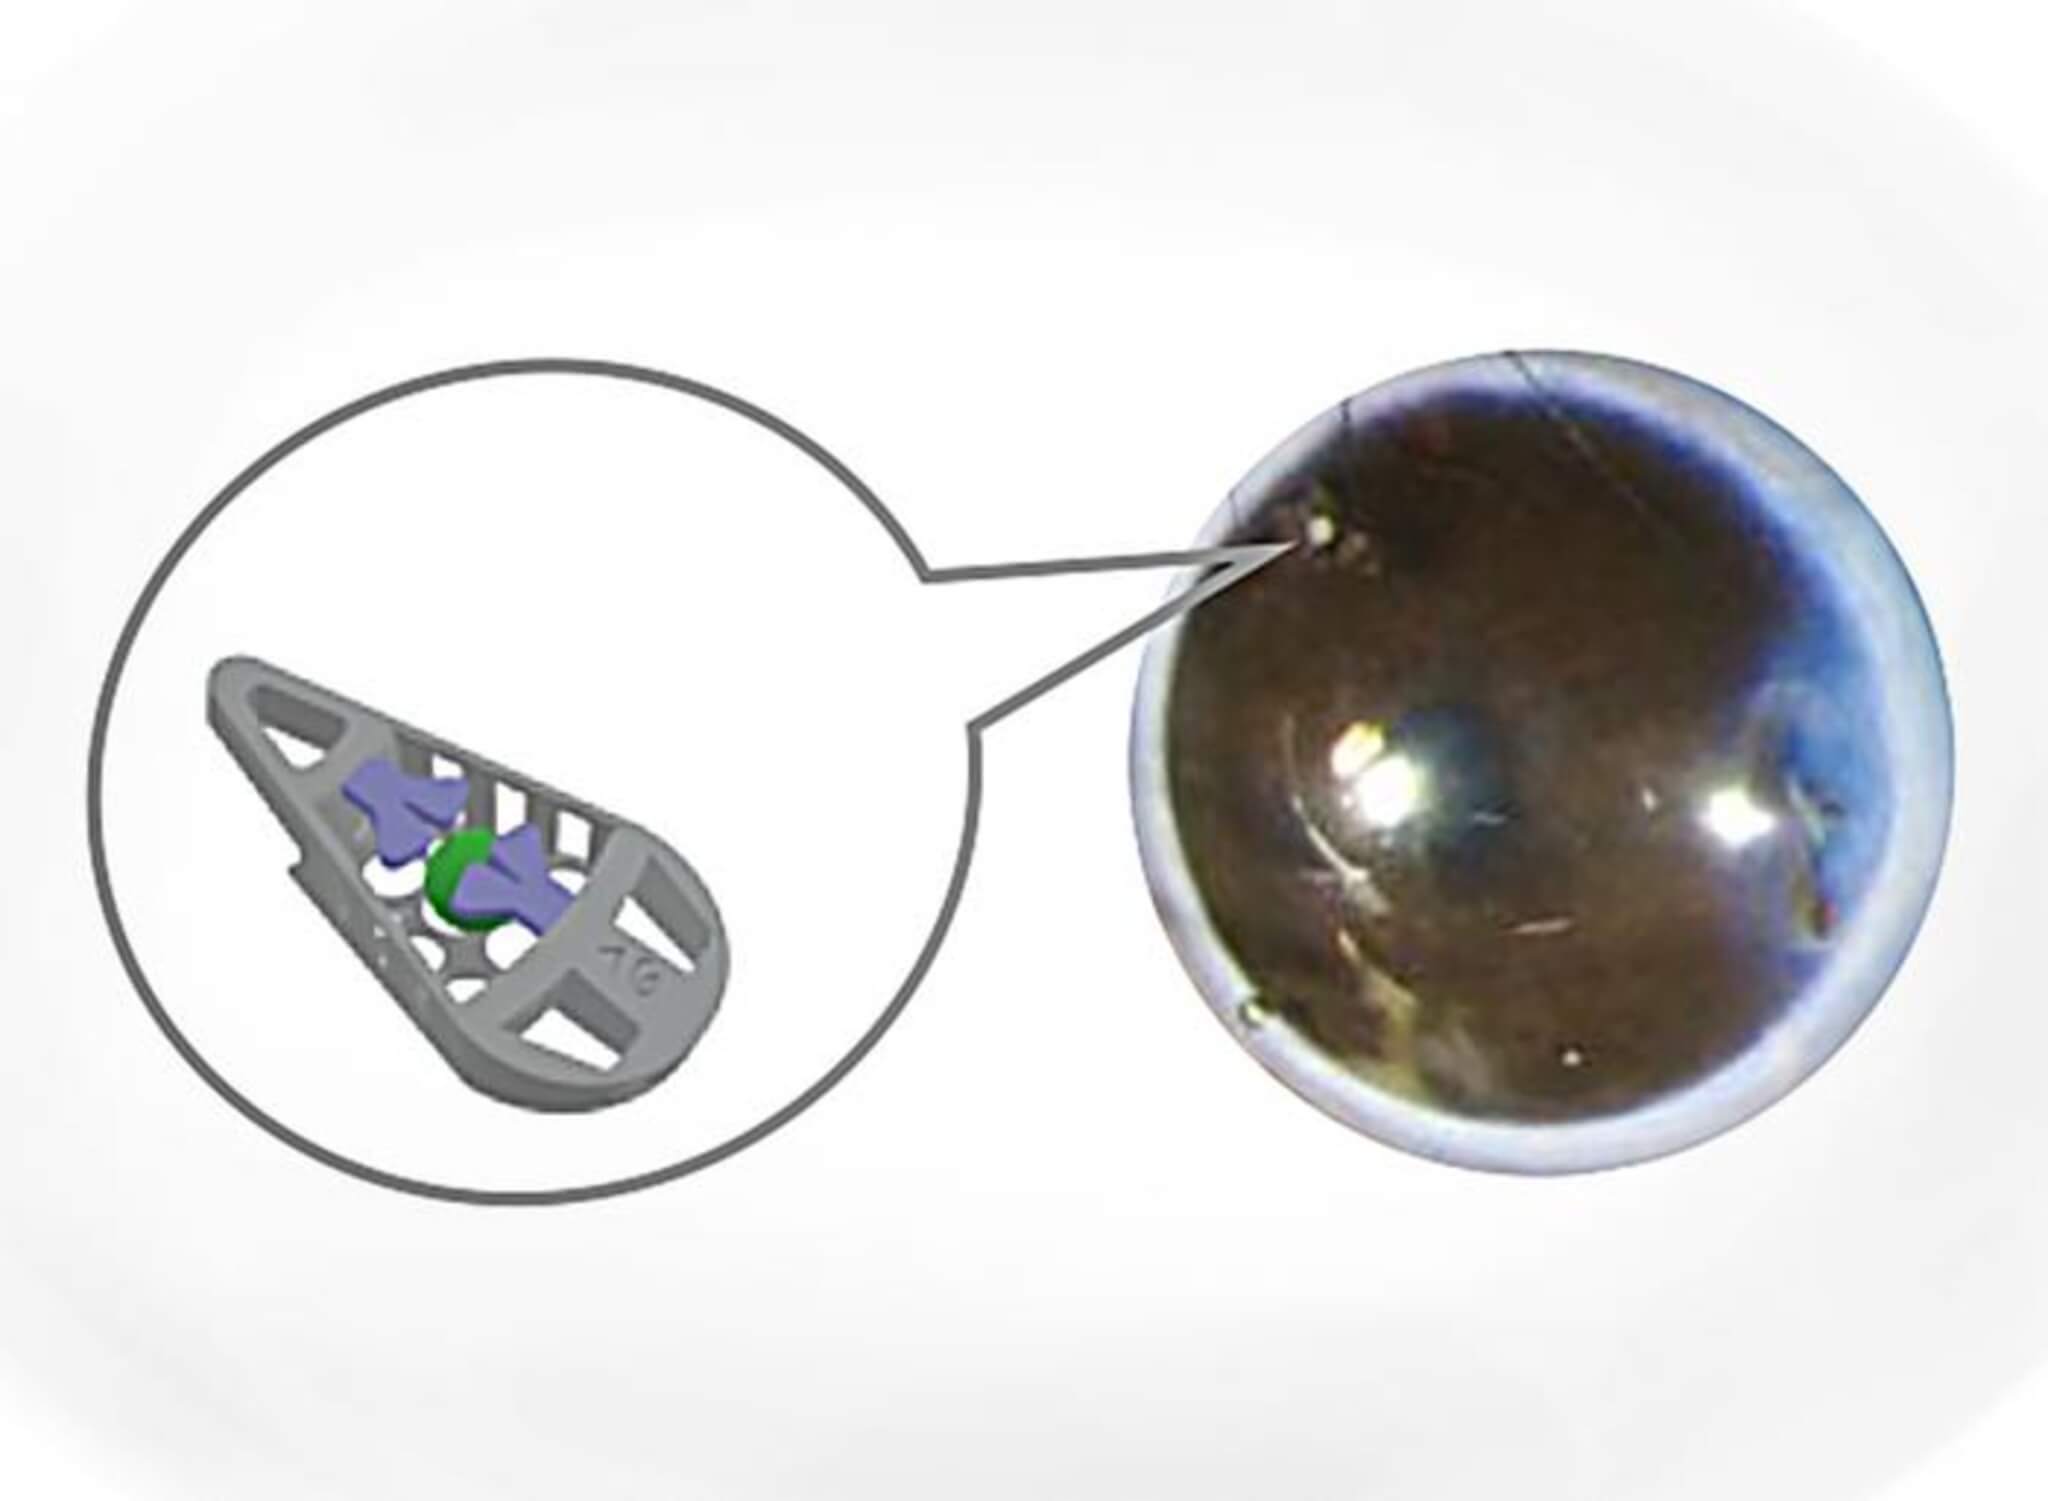 Illustration of the microdevice, and photograph of its position in the eye of a lab mouse